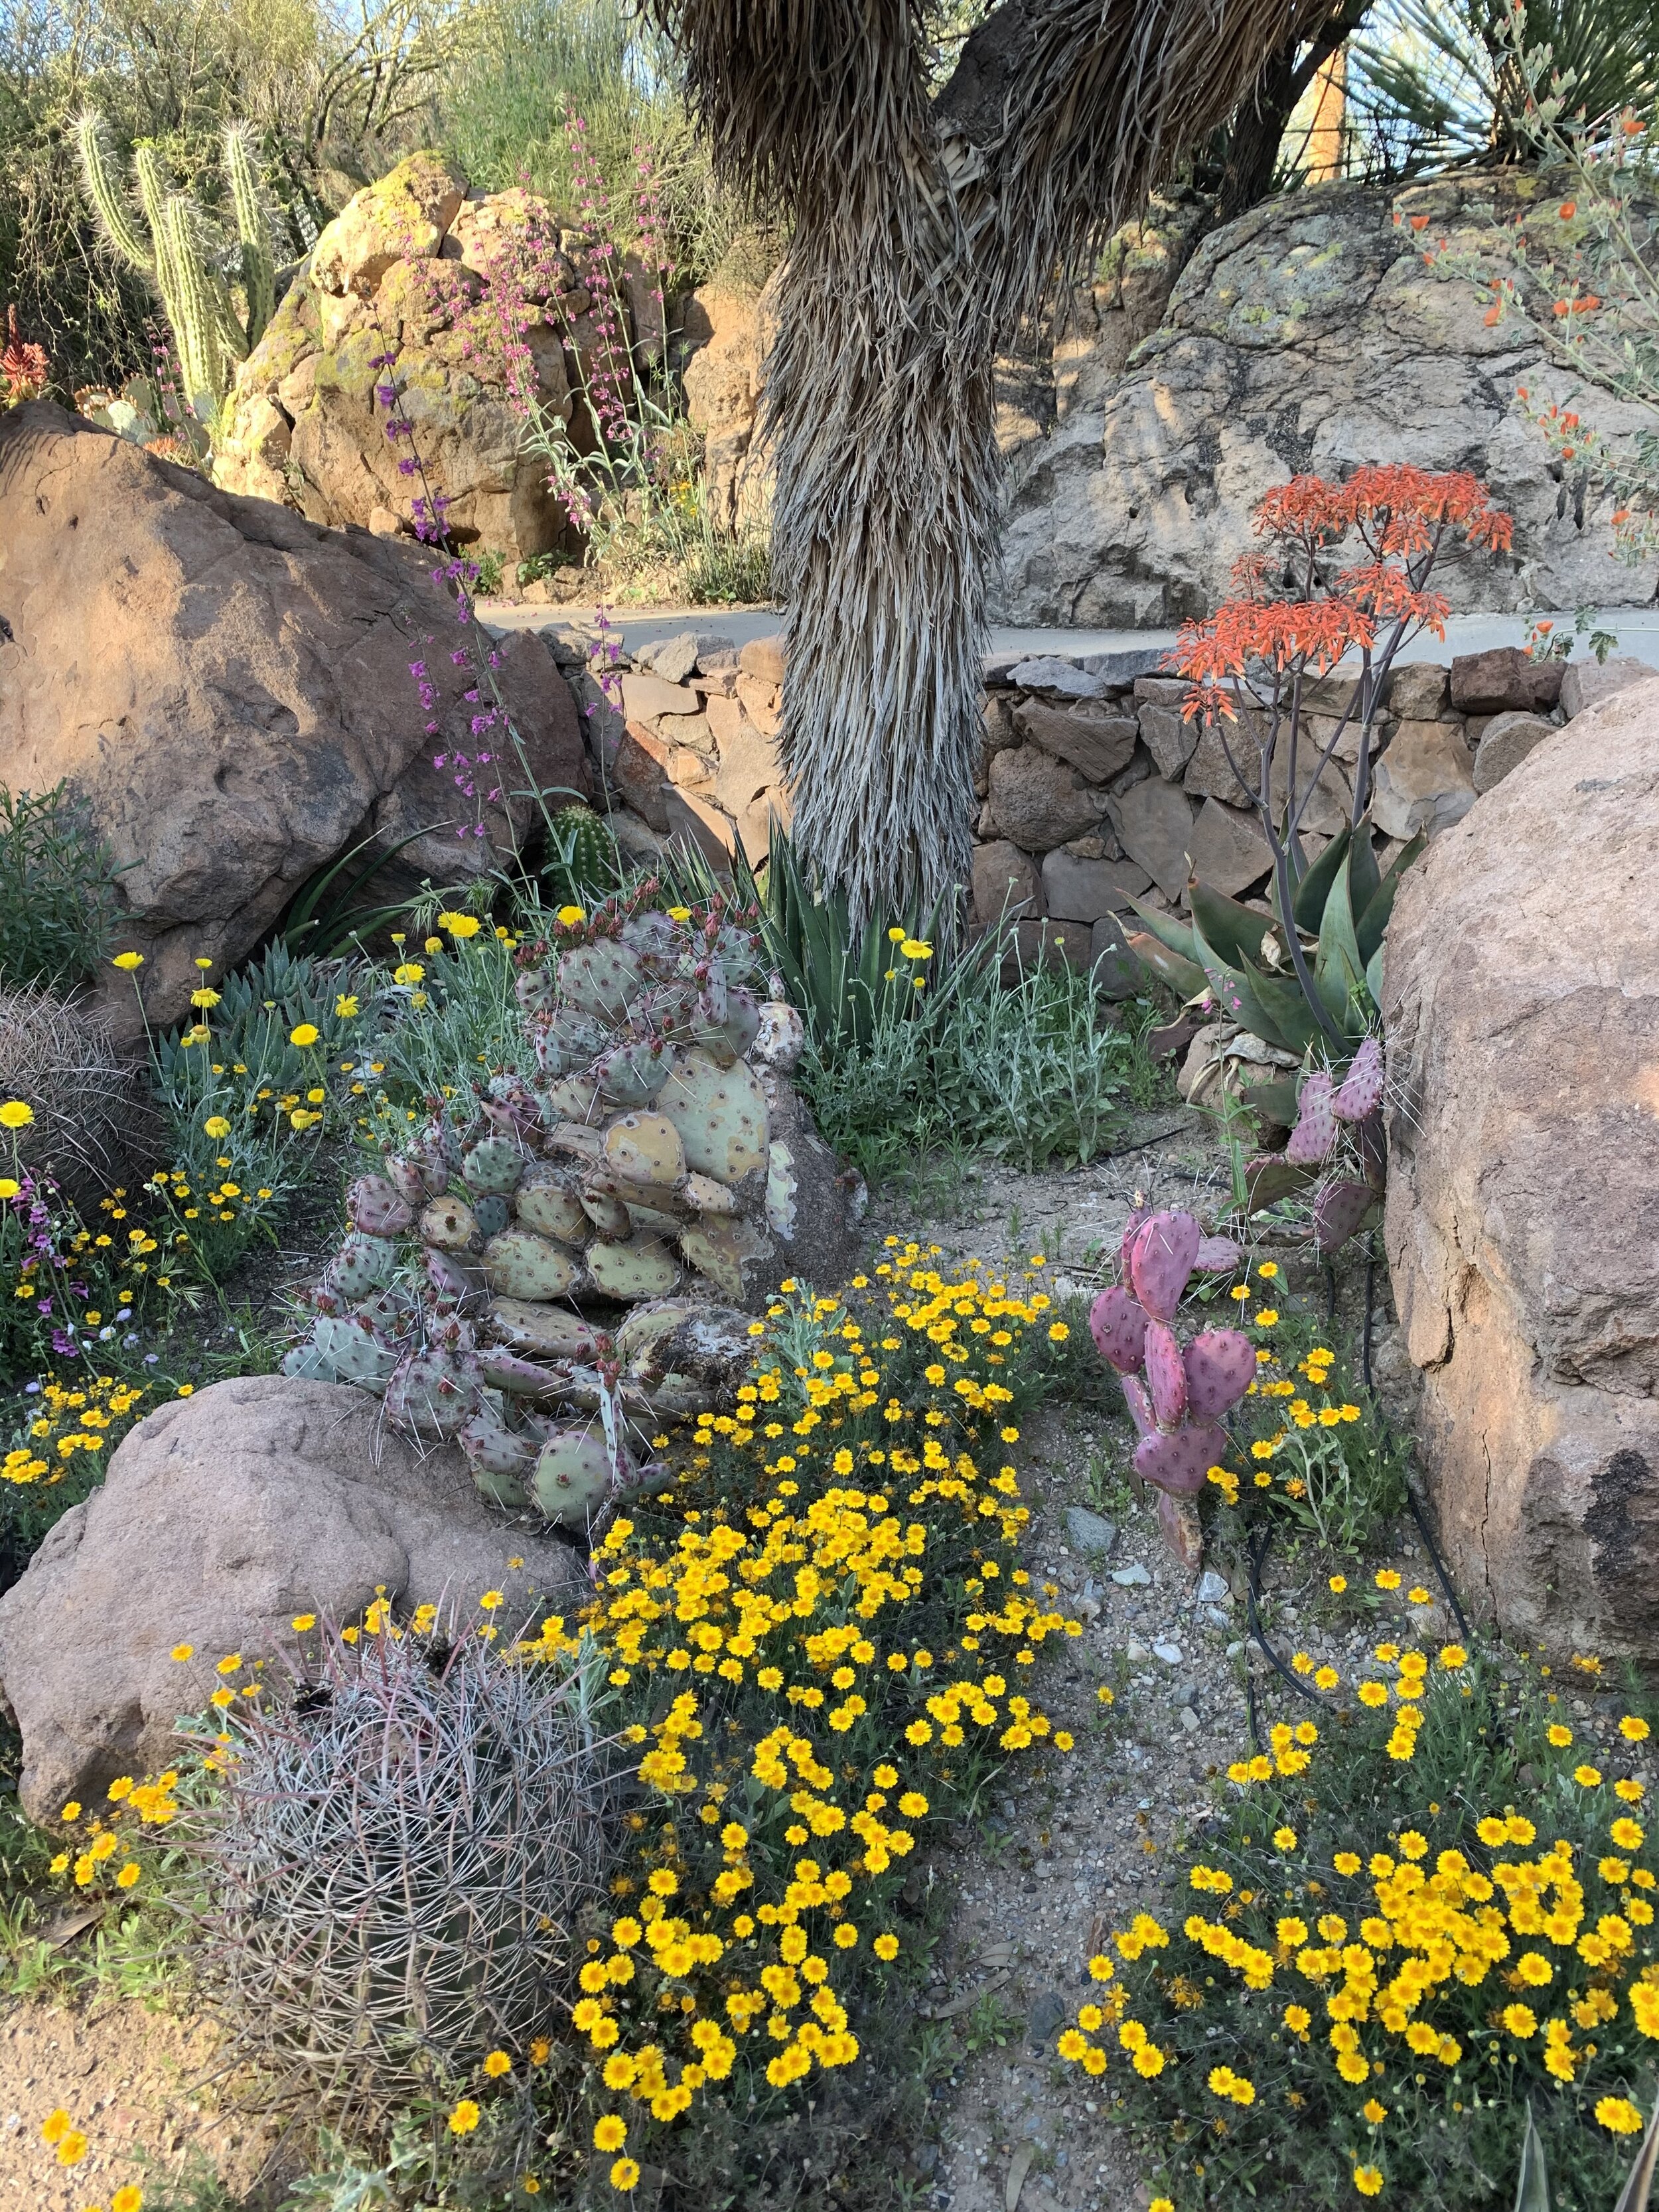  This picture shows some of the diversity of color in the desert plants during spring. 